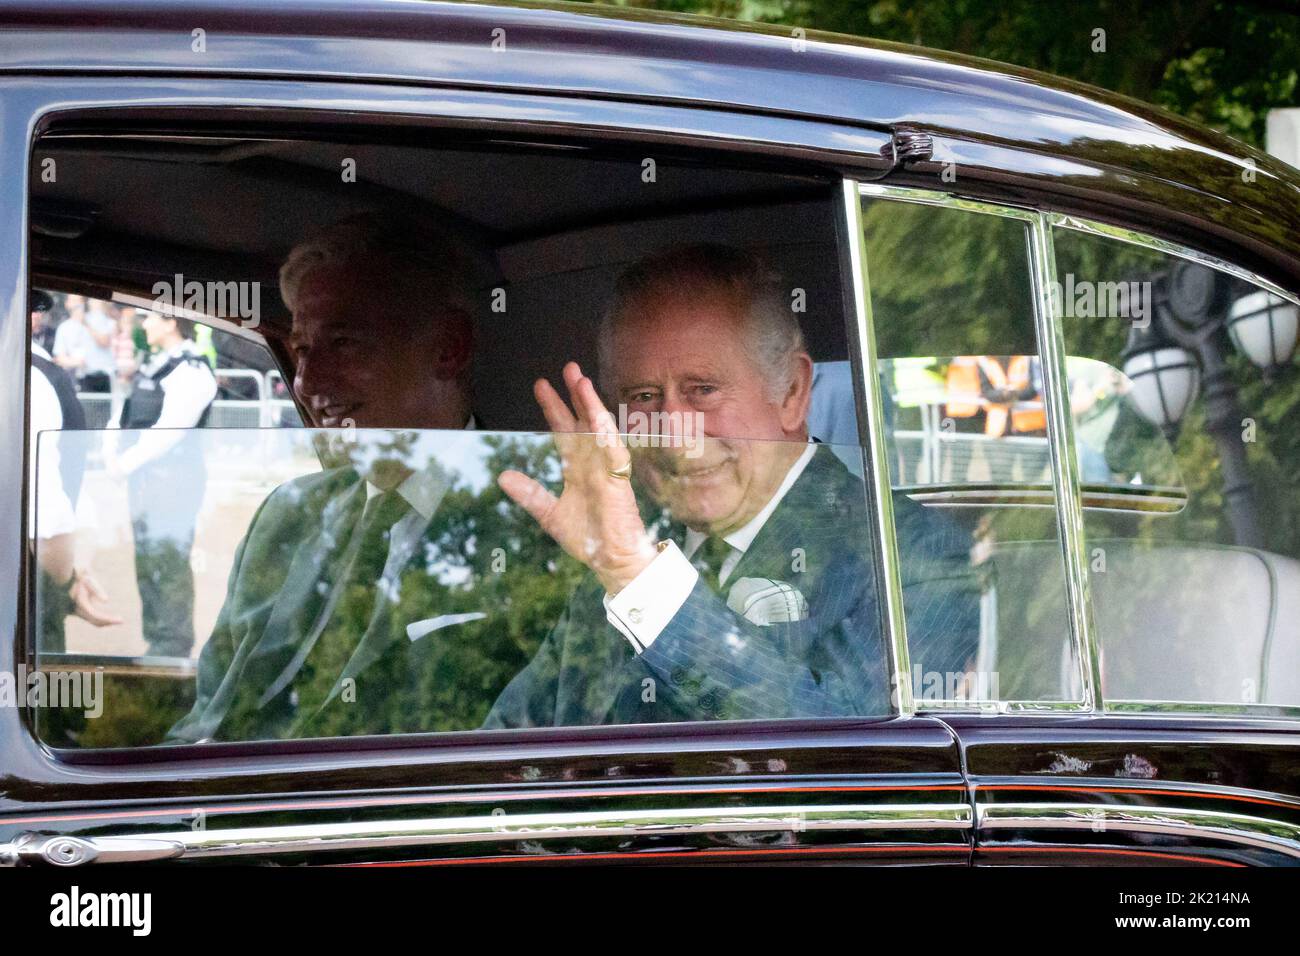 King Charles III returns to Buckingham Palace in a car surrounded by royal fans and well-wishers as the nation continues to mourn for the loss of Quee Stock Photo